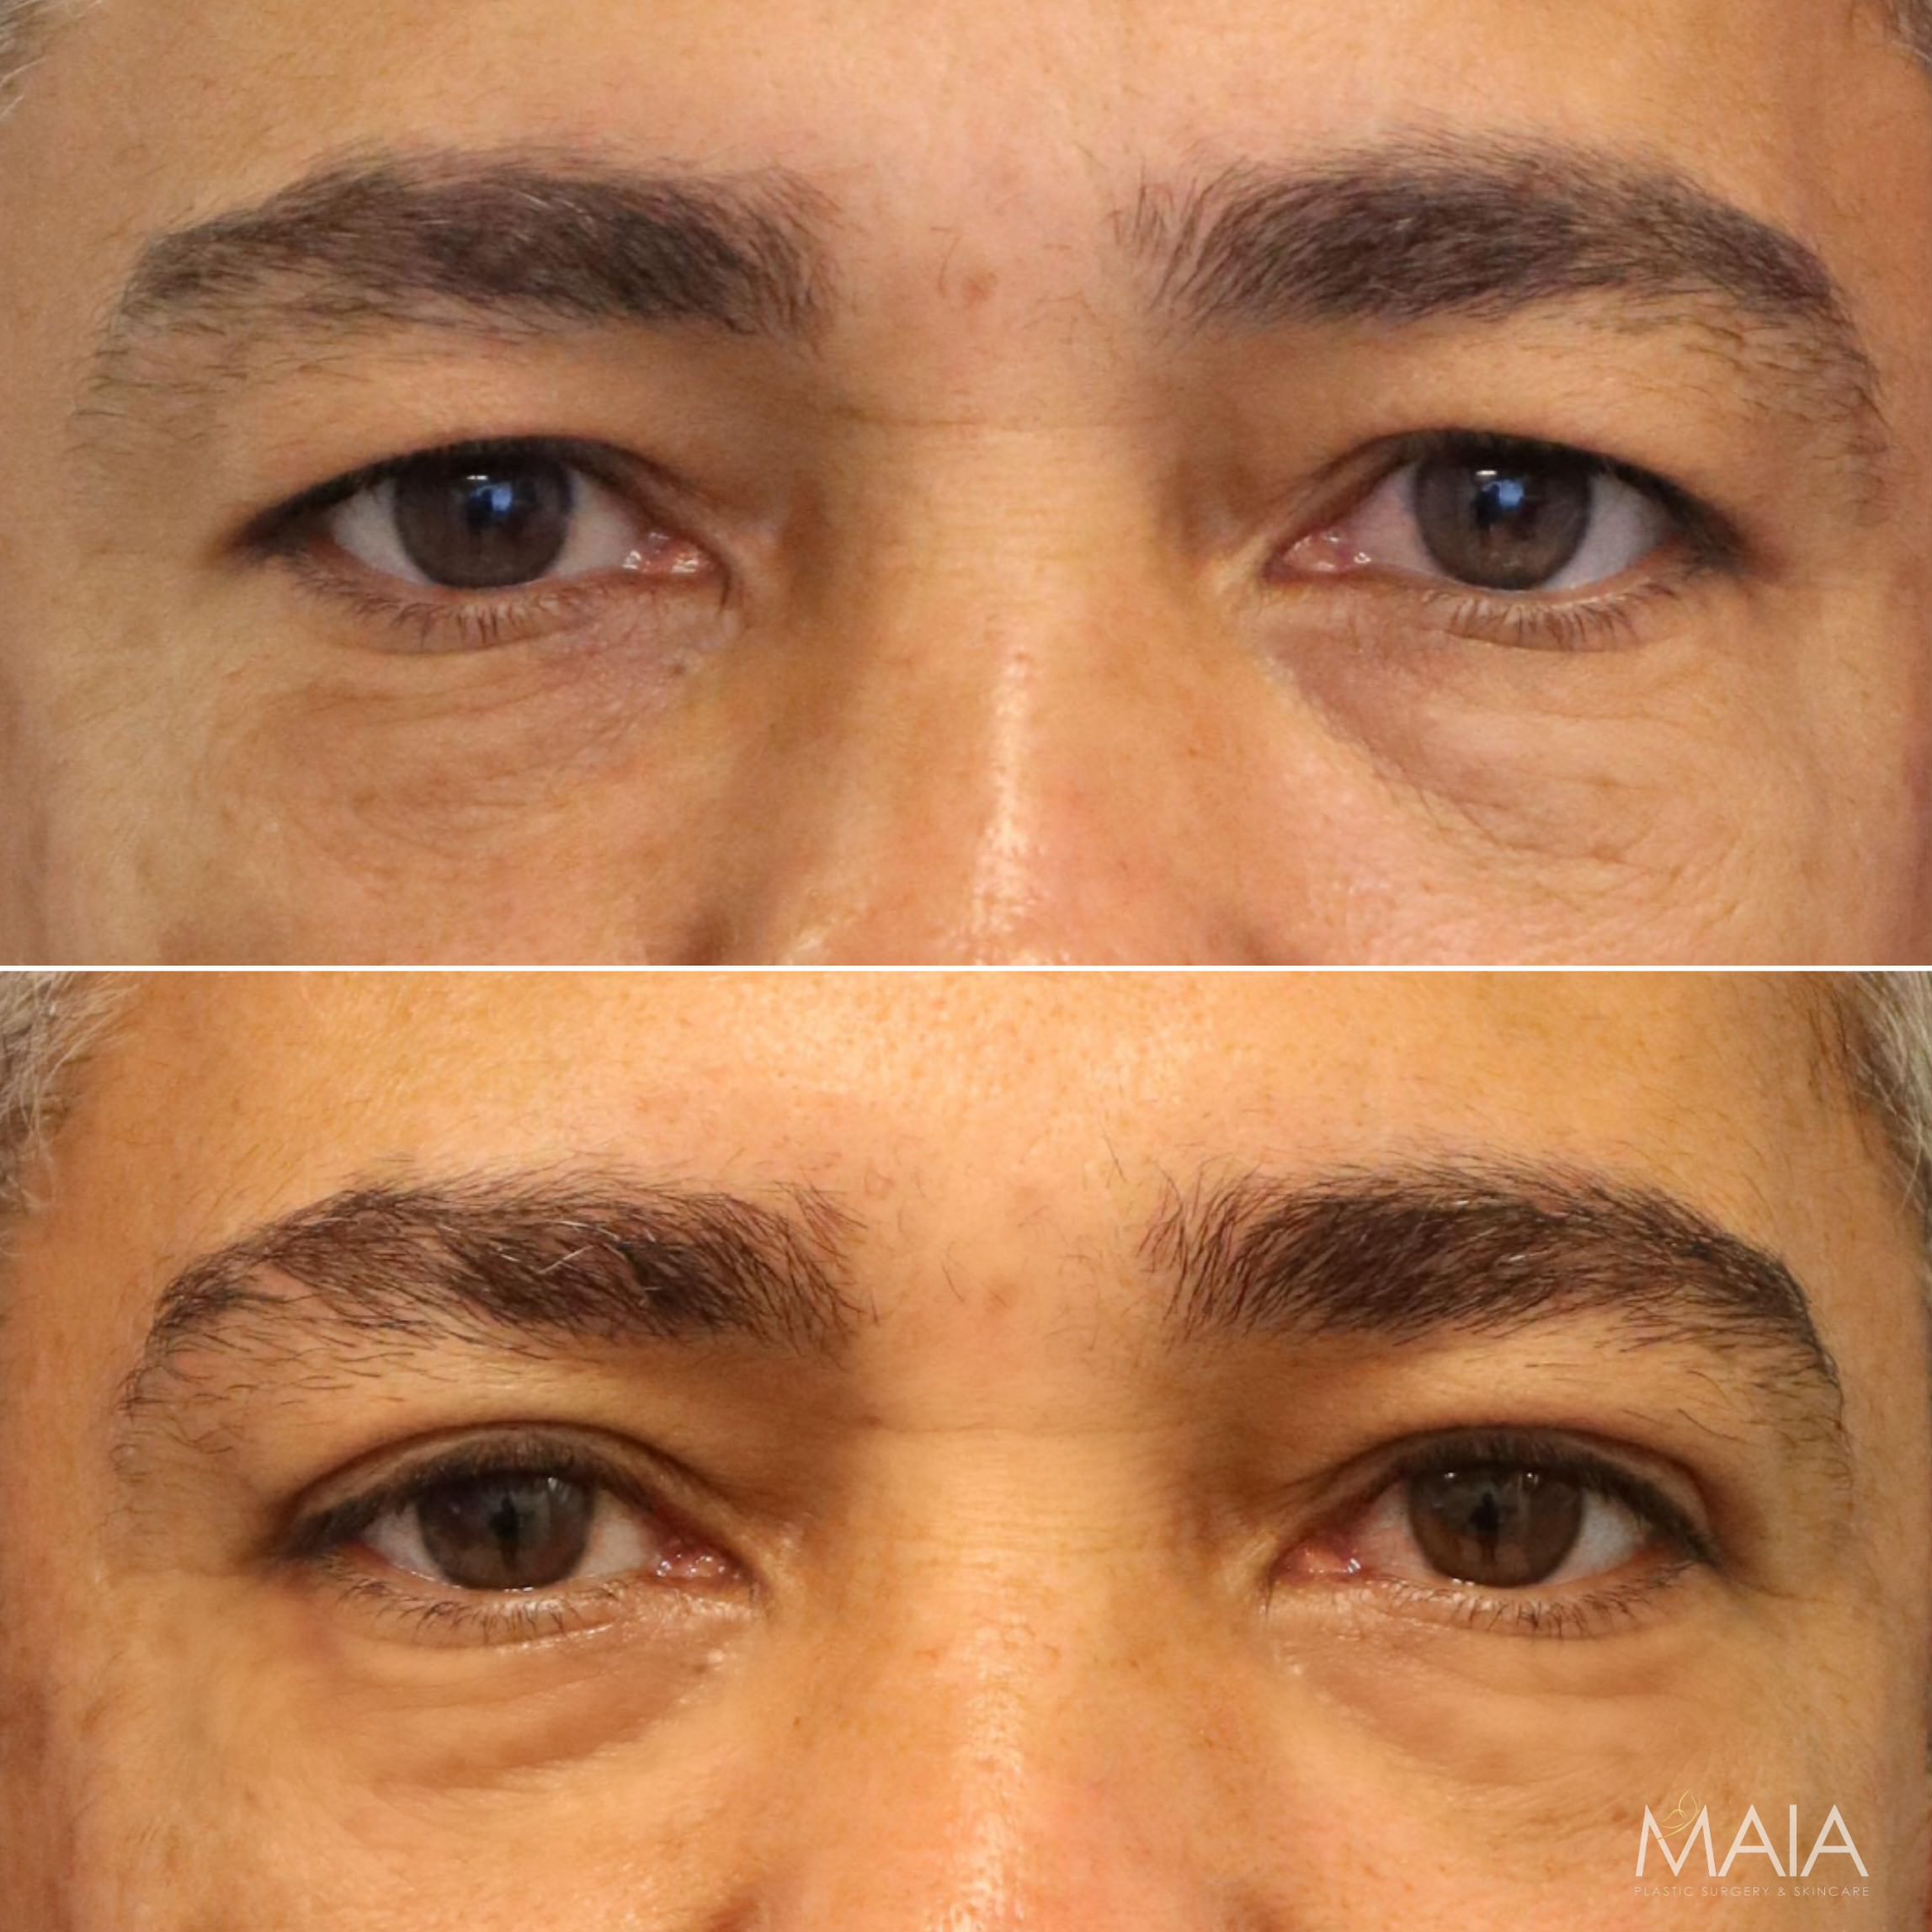 49 year-old male before and after an upper eyelid lift